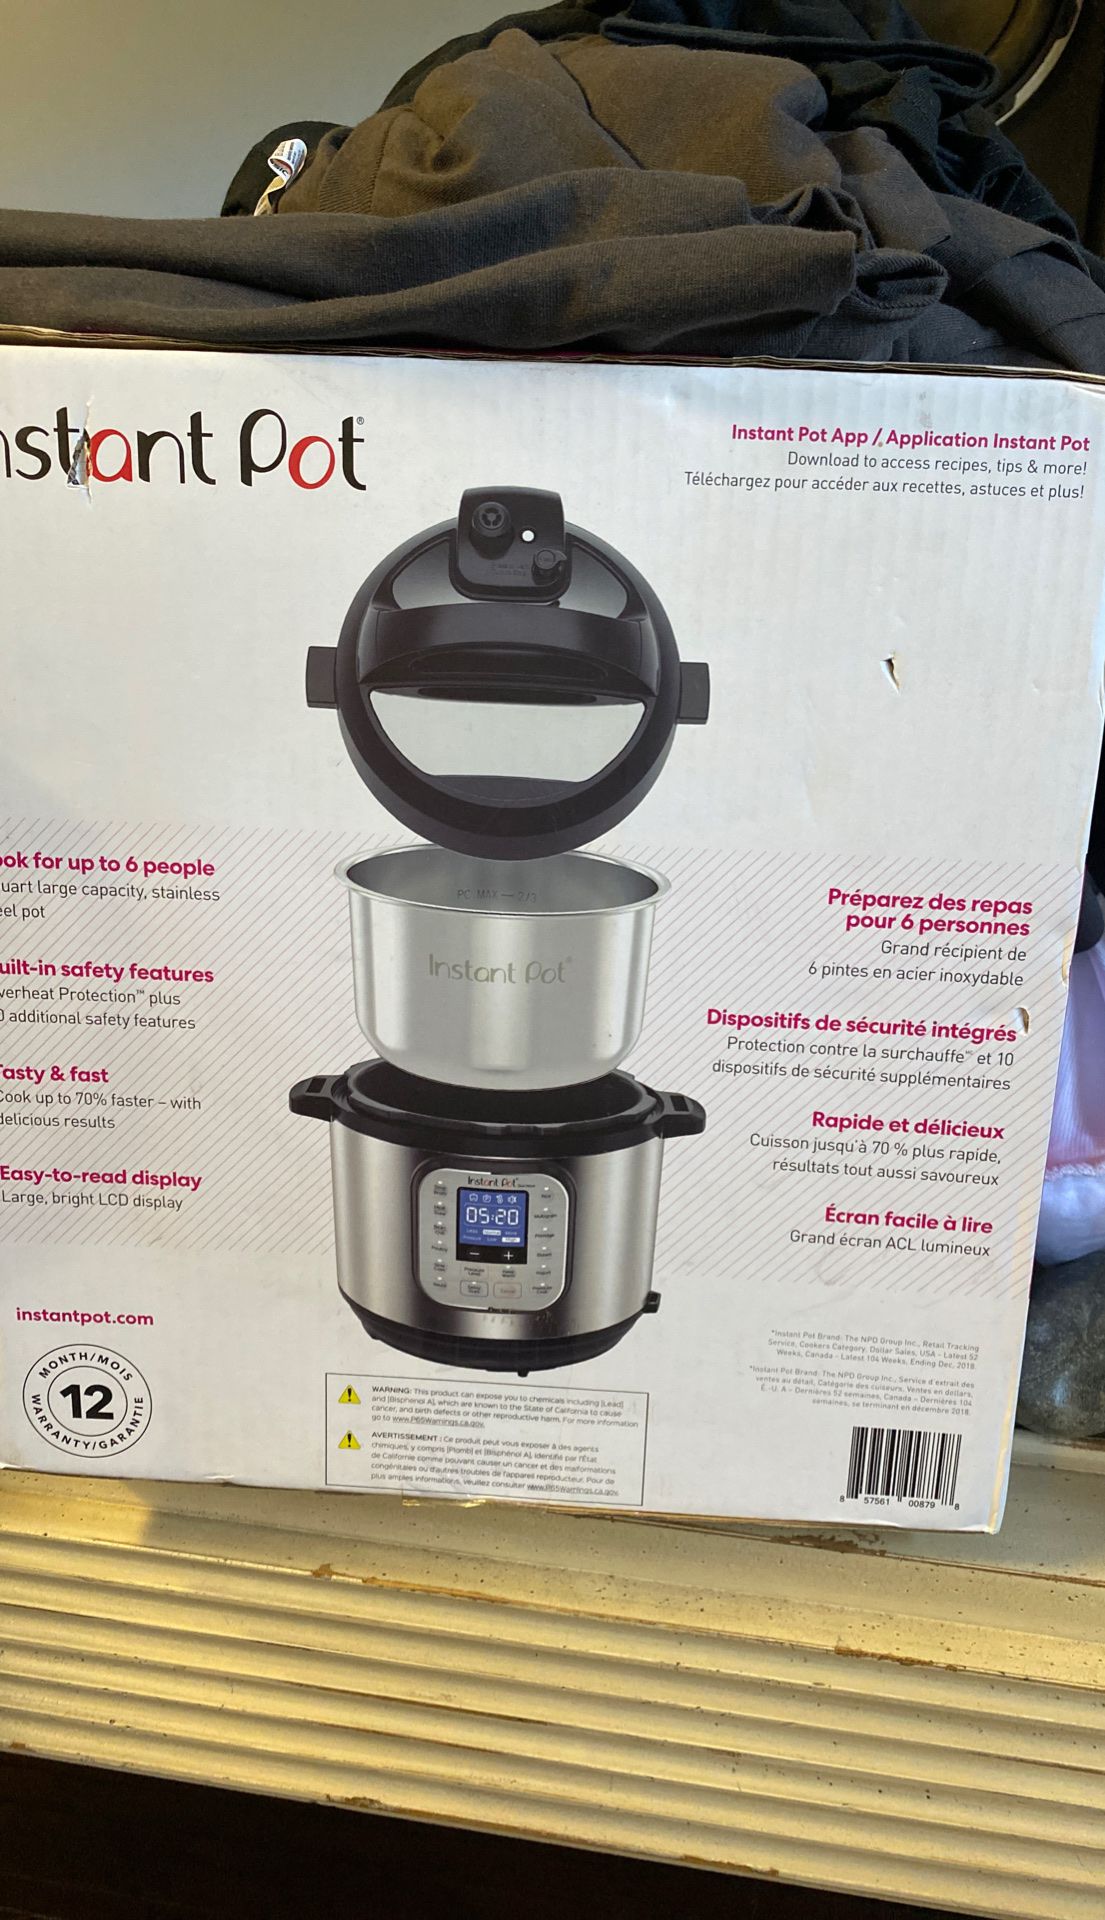 Instant pot Pressure cooker brand new never opened